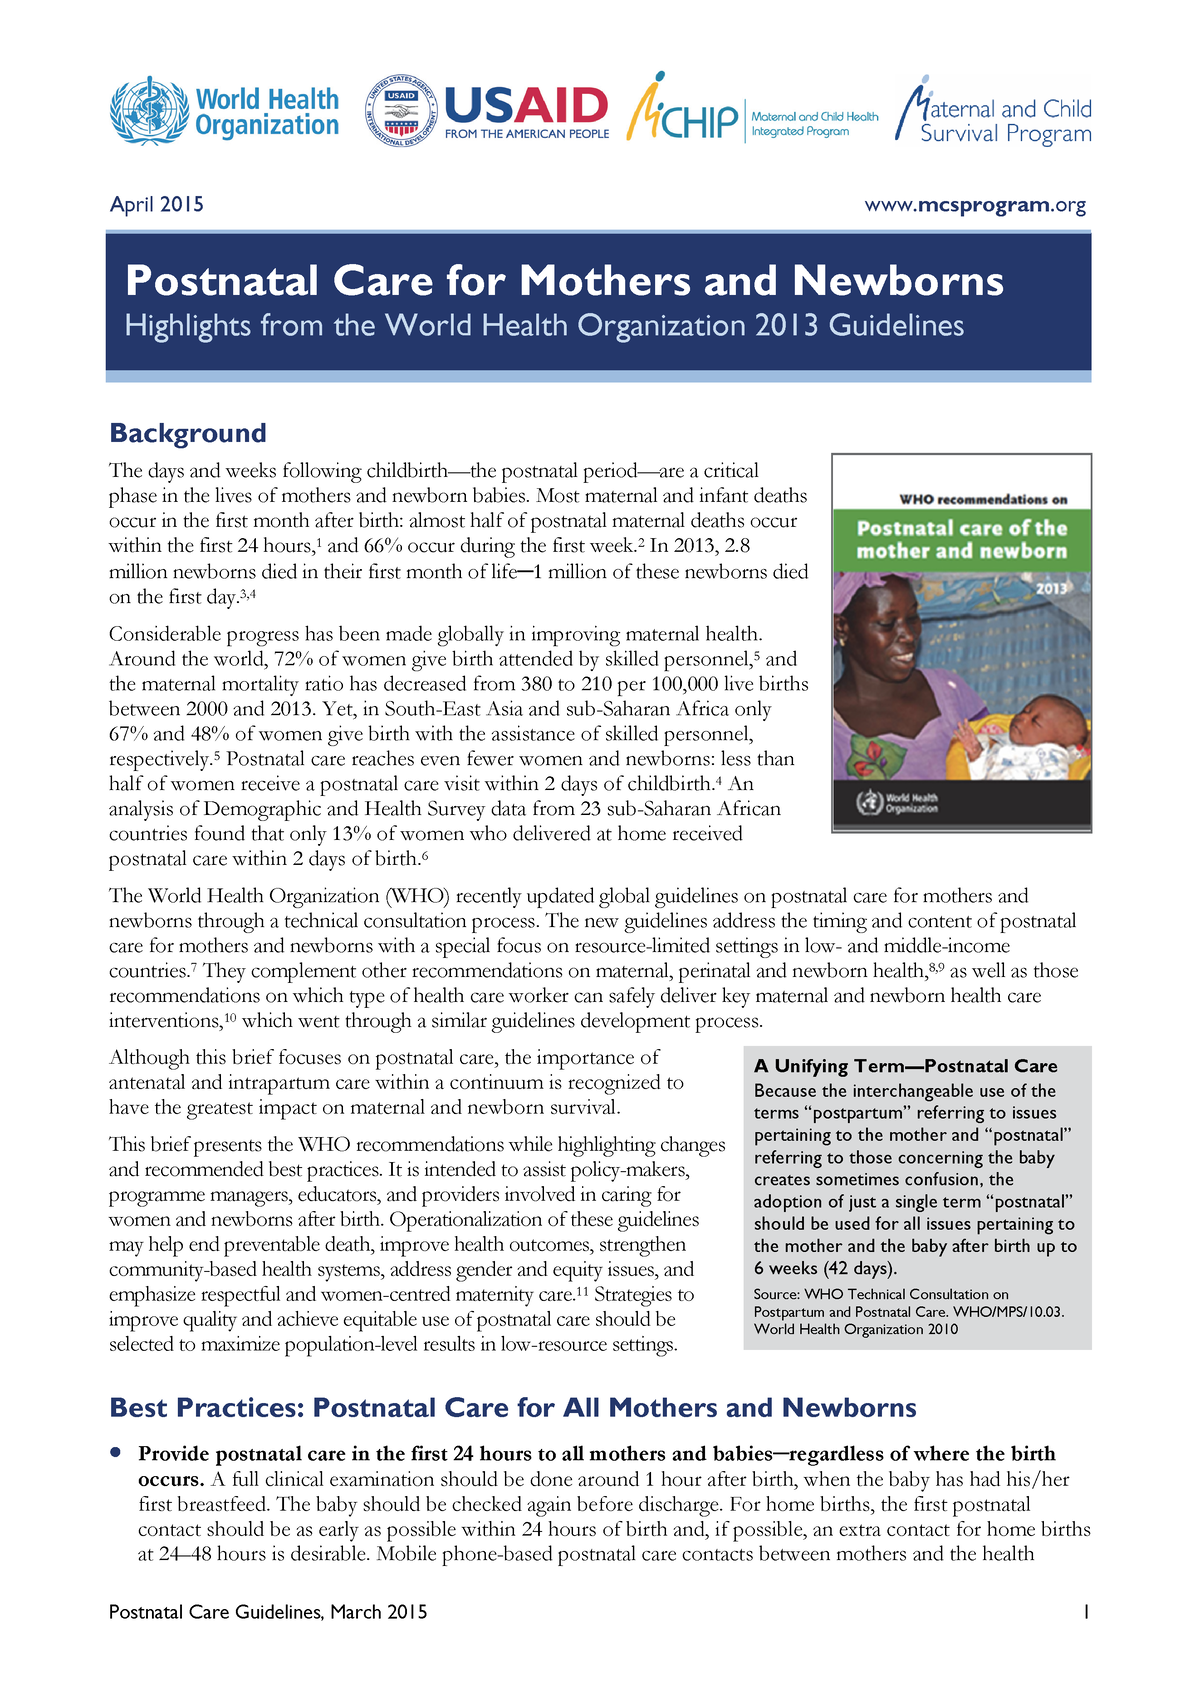 assignment on postnatal care